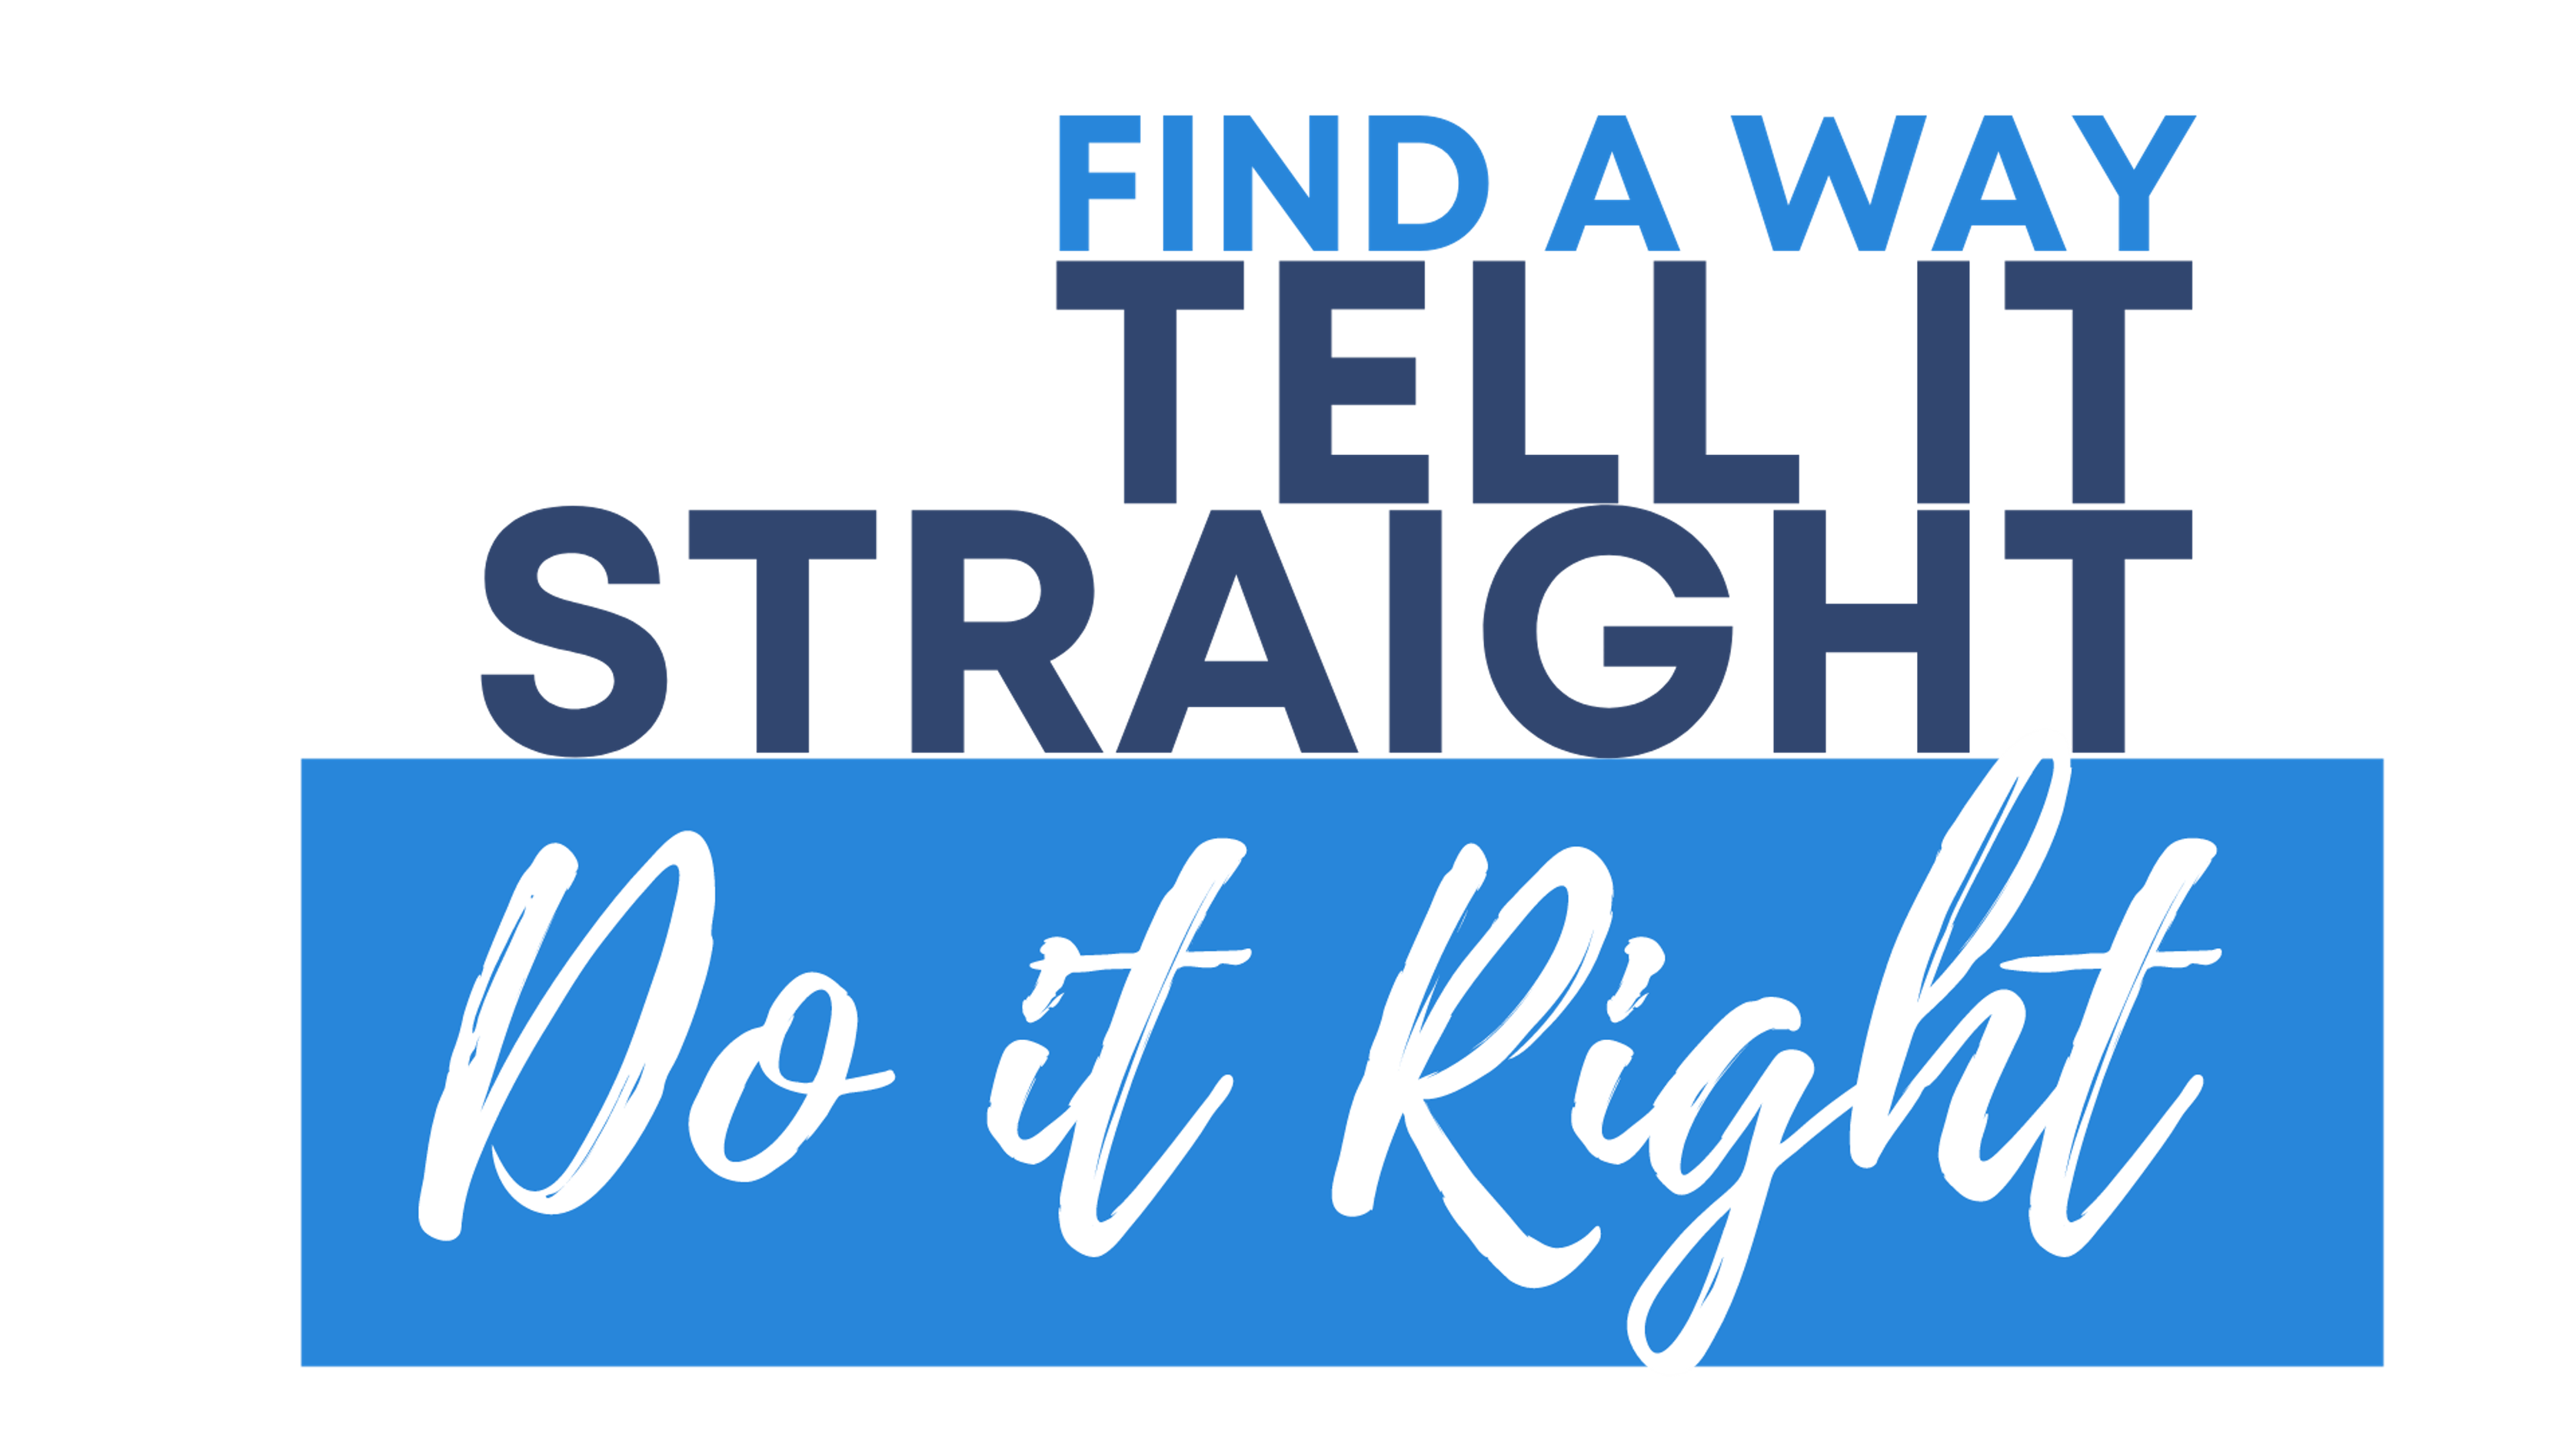 Find A Way, Tell It Straight, Do It Right - MPG